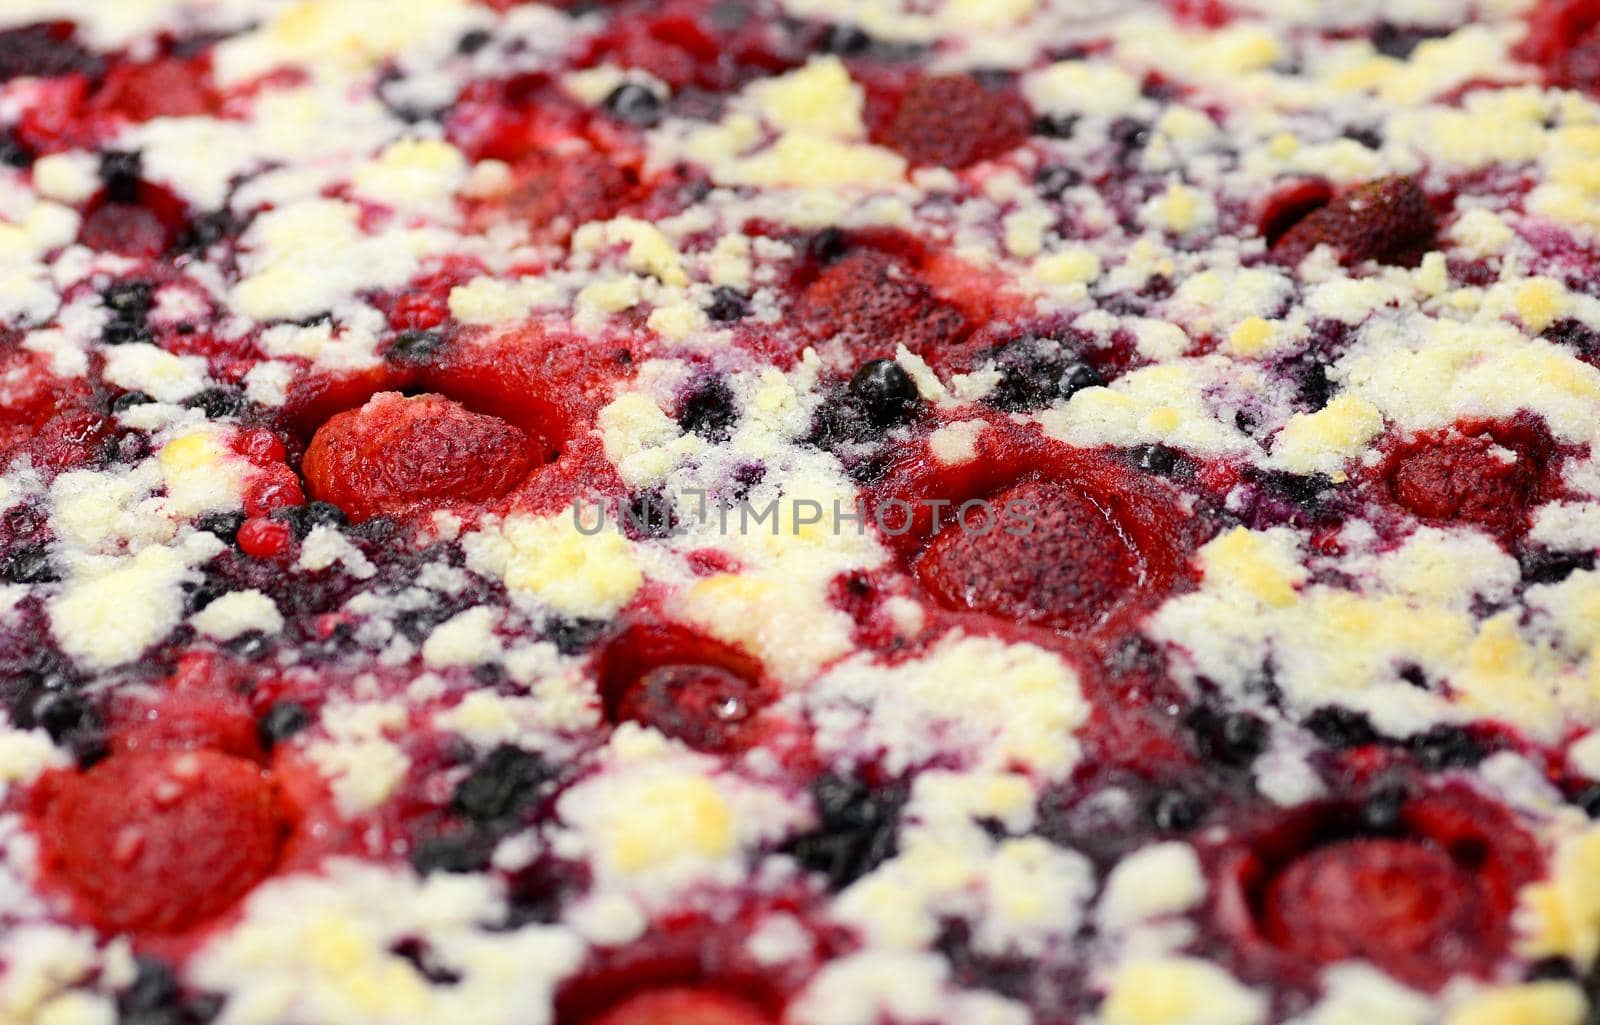 Full frame background of freshly baked cake with berries and strawberries fruit.